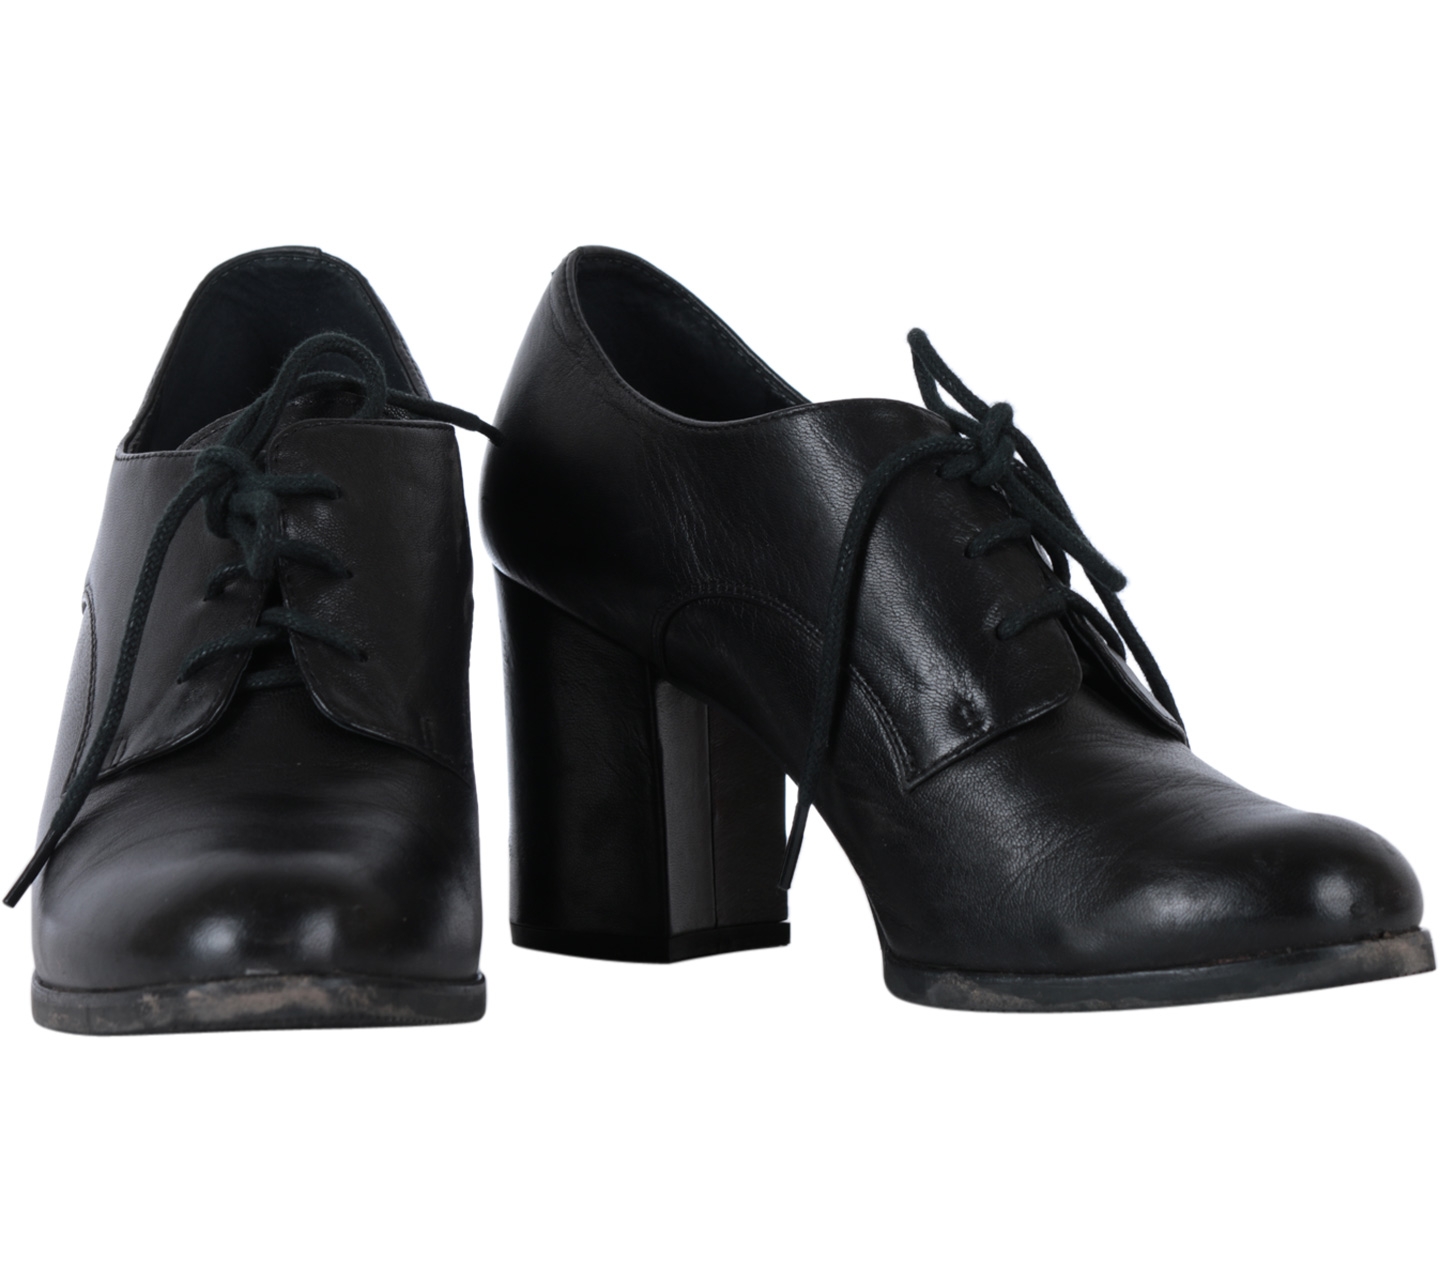 Staccato Black Lace Up Boots